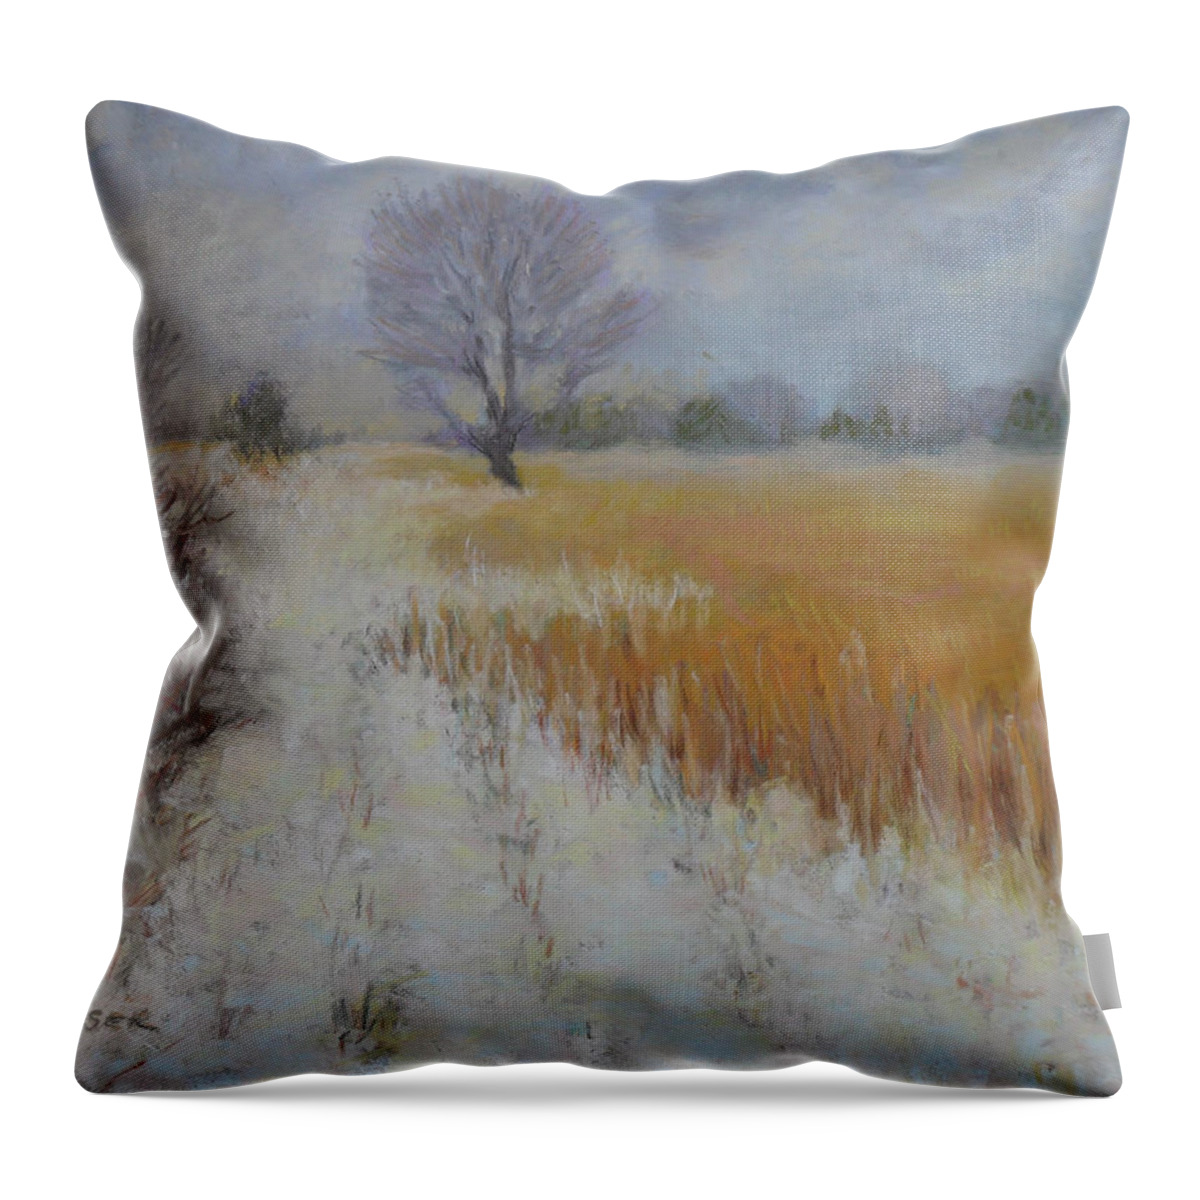 Landscape: Snowy View Of Farmers Field Under An Overcast Gray Sky Throw Pillow featuring the painting Cream of Wheat by Julie Mayser